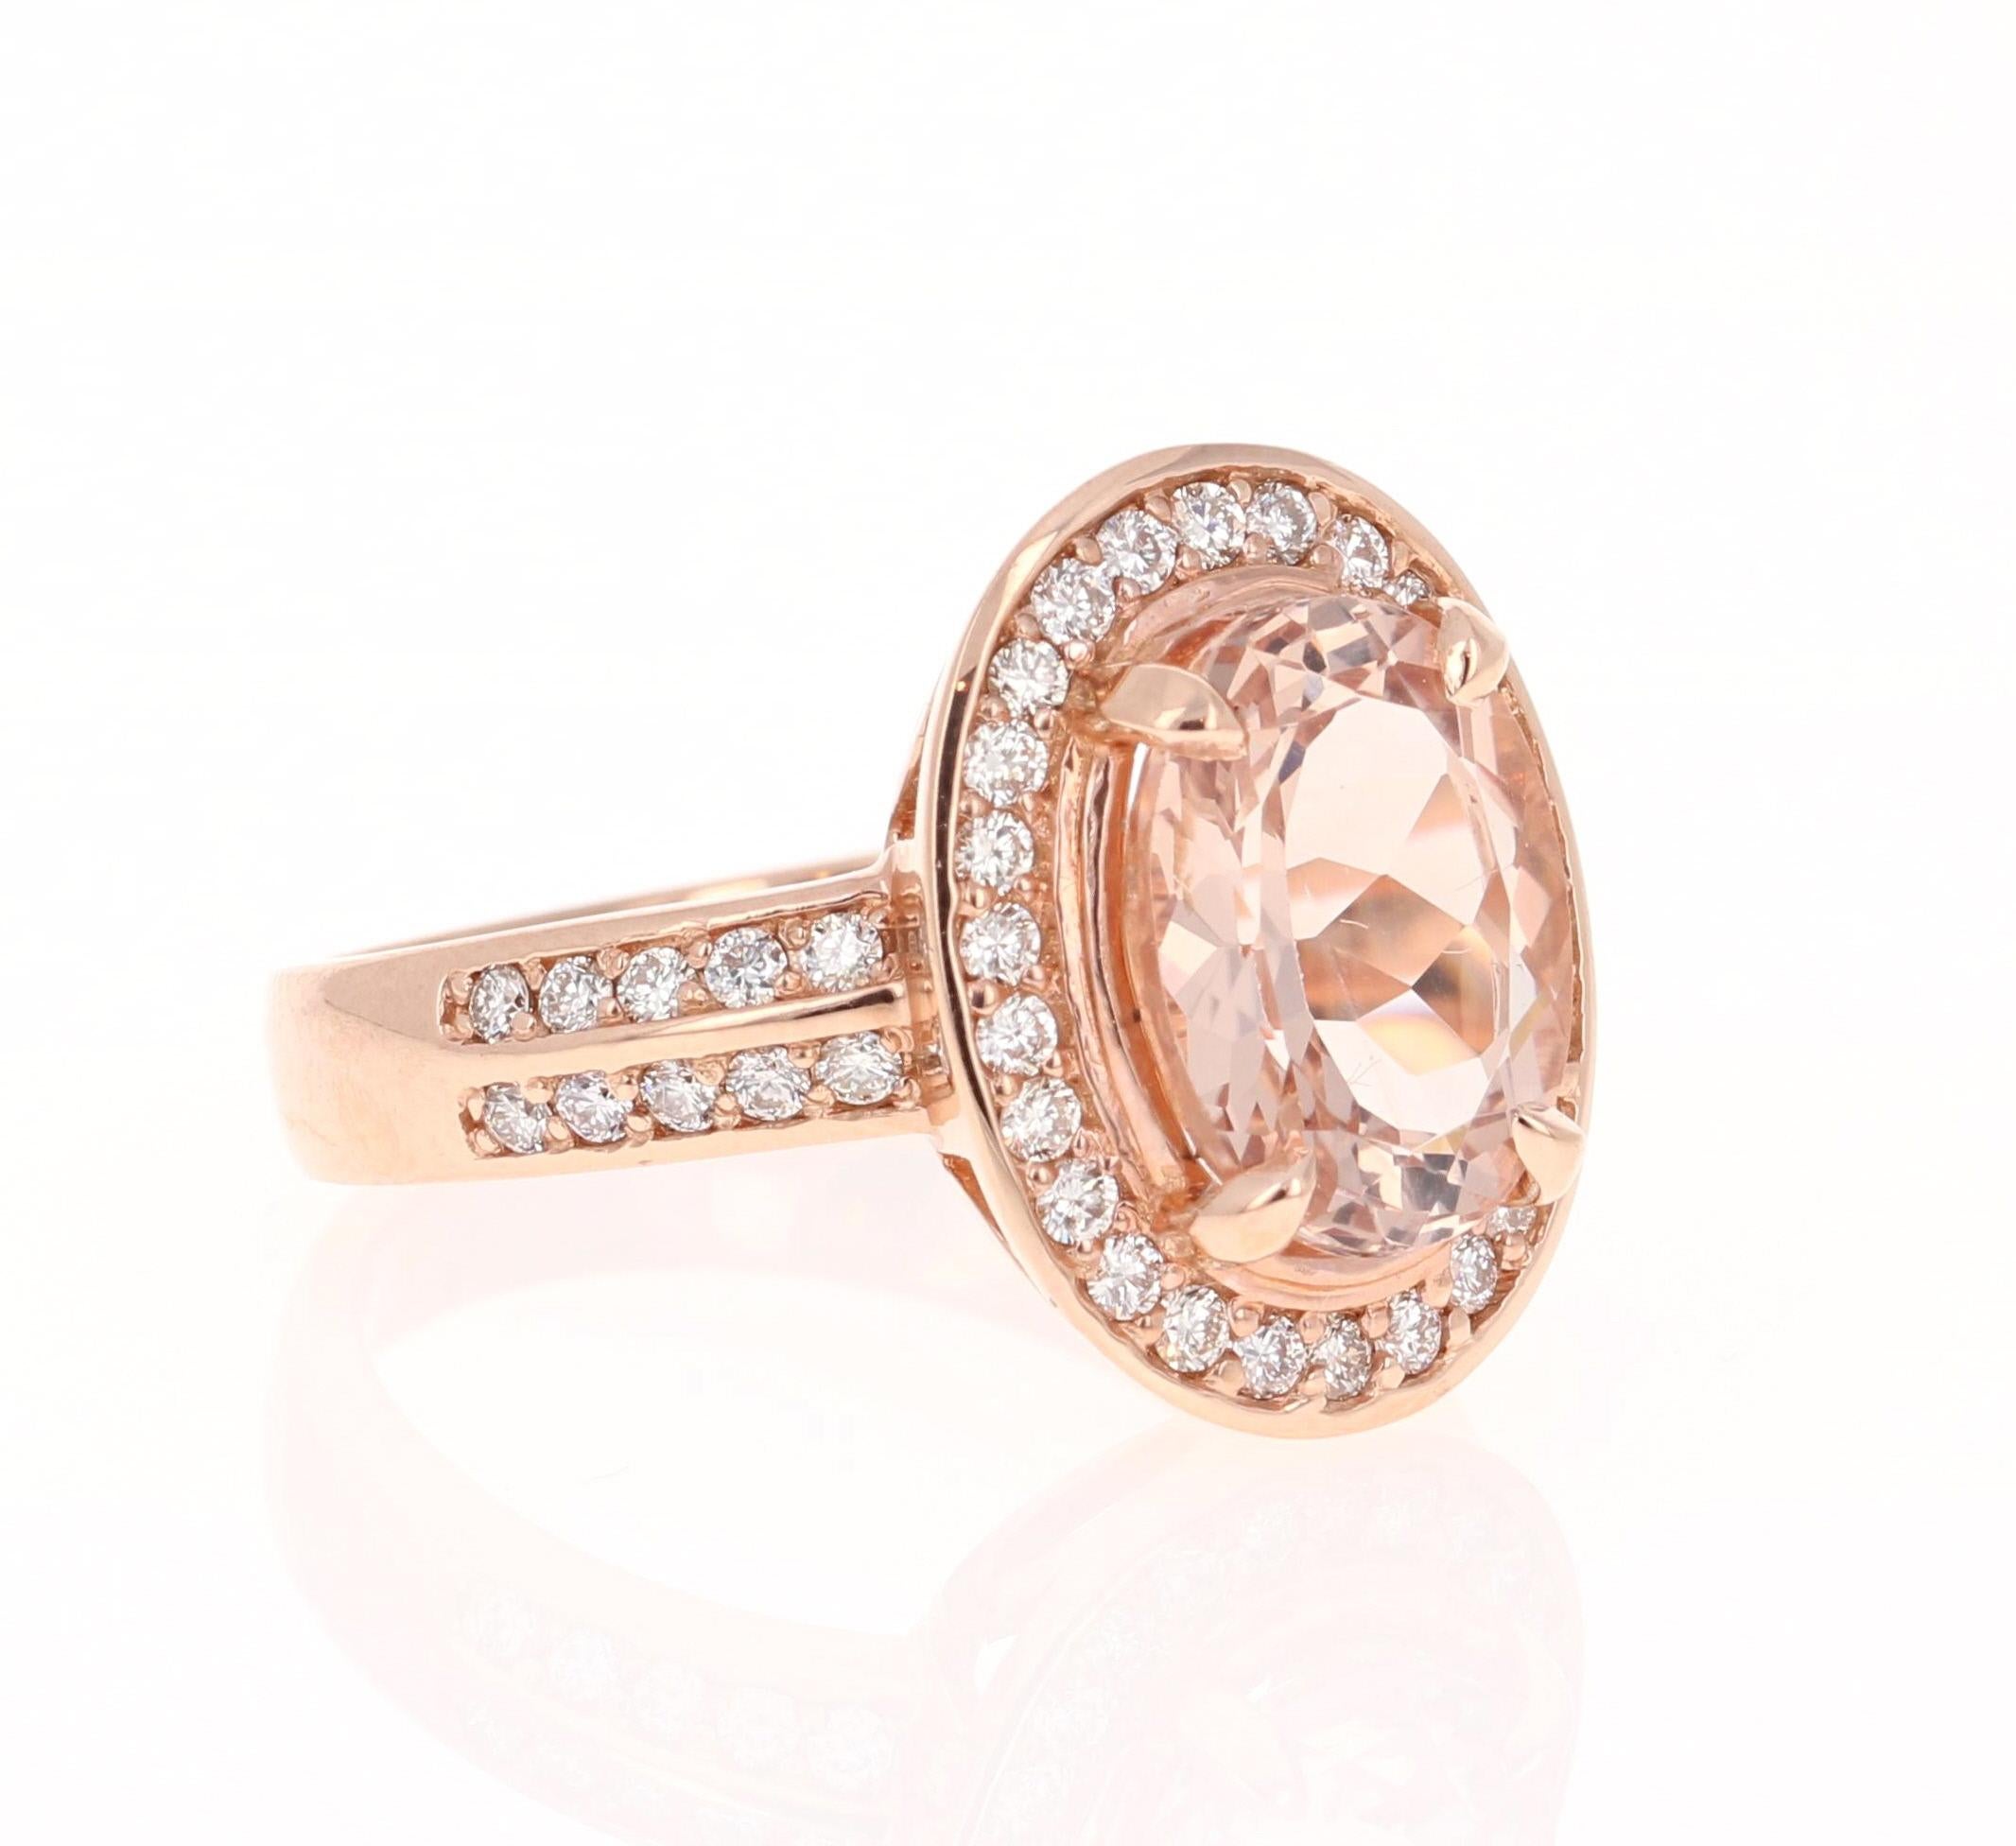 This Morganite ring has a beautiful 3.11 Carat Oval Cut Morganite and is surrounded by a halo and diamonds on the shank of 46 Round Cut Diamonds that weigh 0.57 Carats. The diamonds have a clarity and color of VS-H. The total carat weight of the